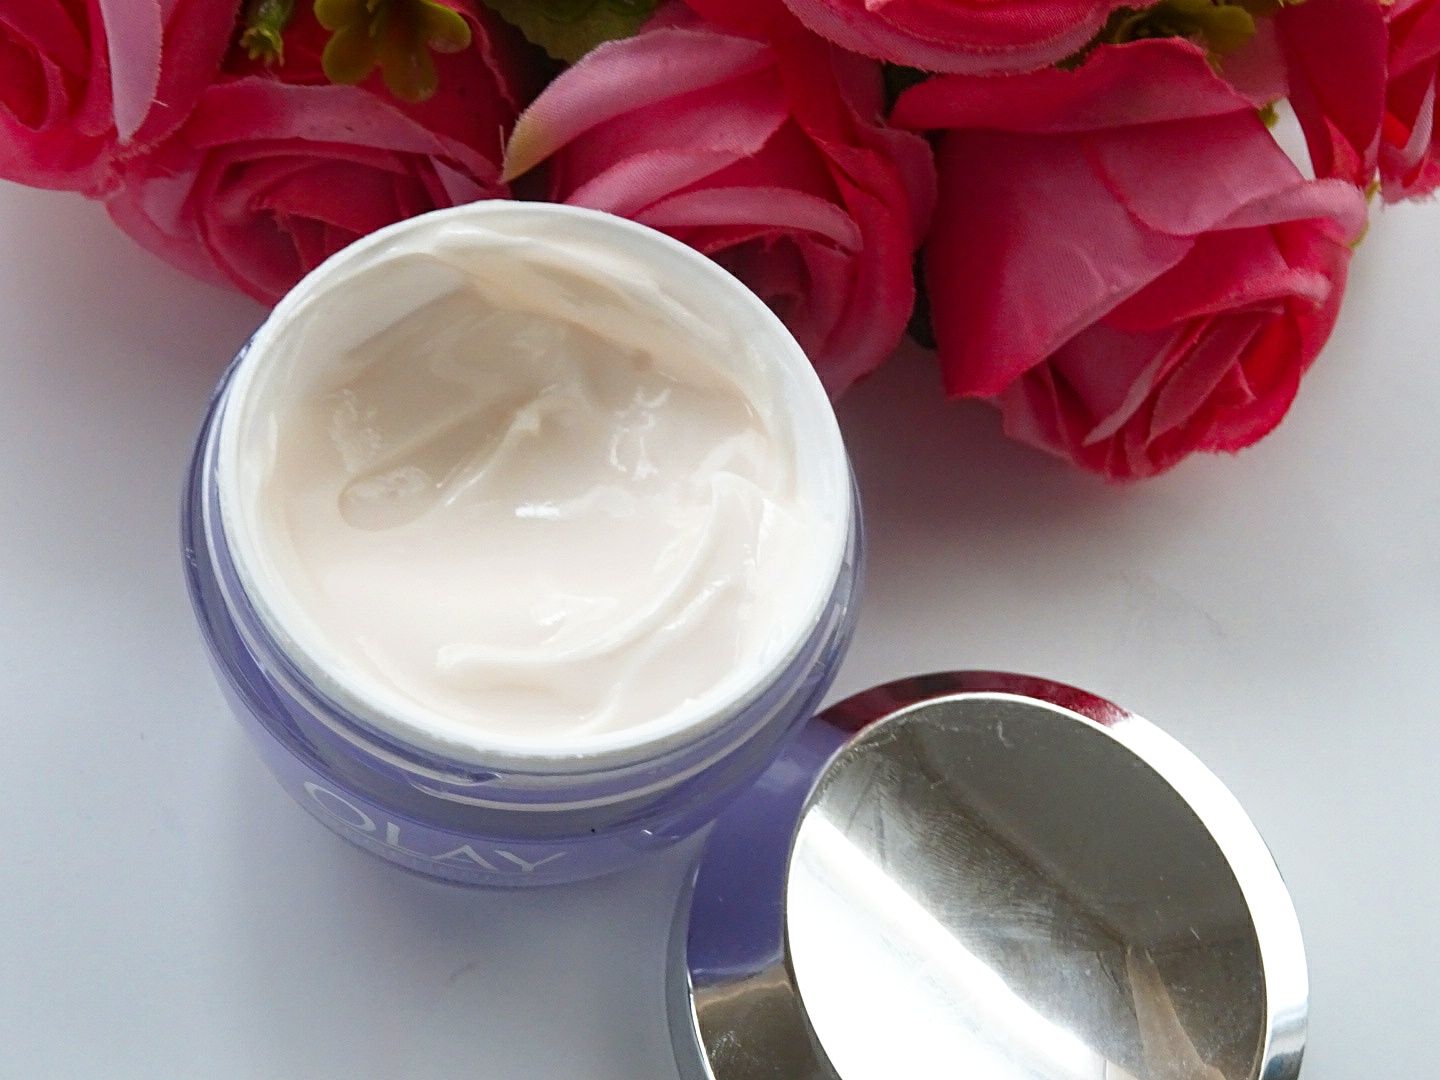 www.lifeandsoullifestyle.com – Firming Mask review review